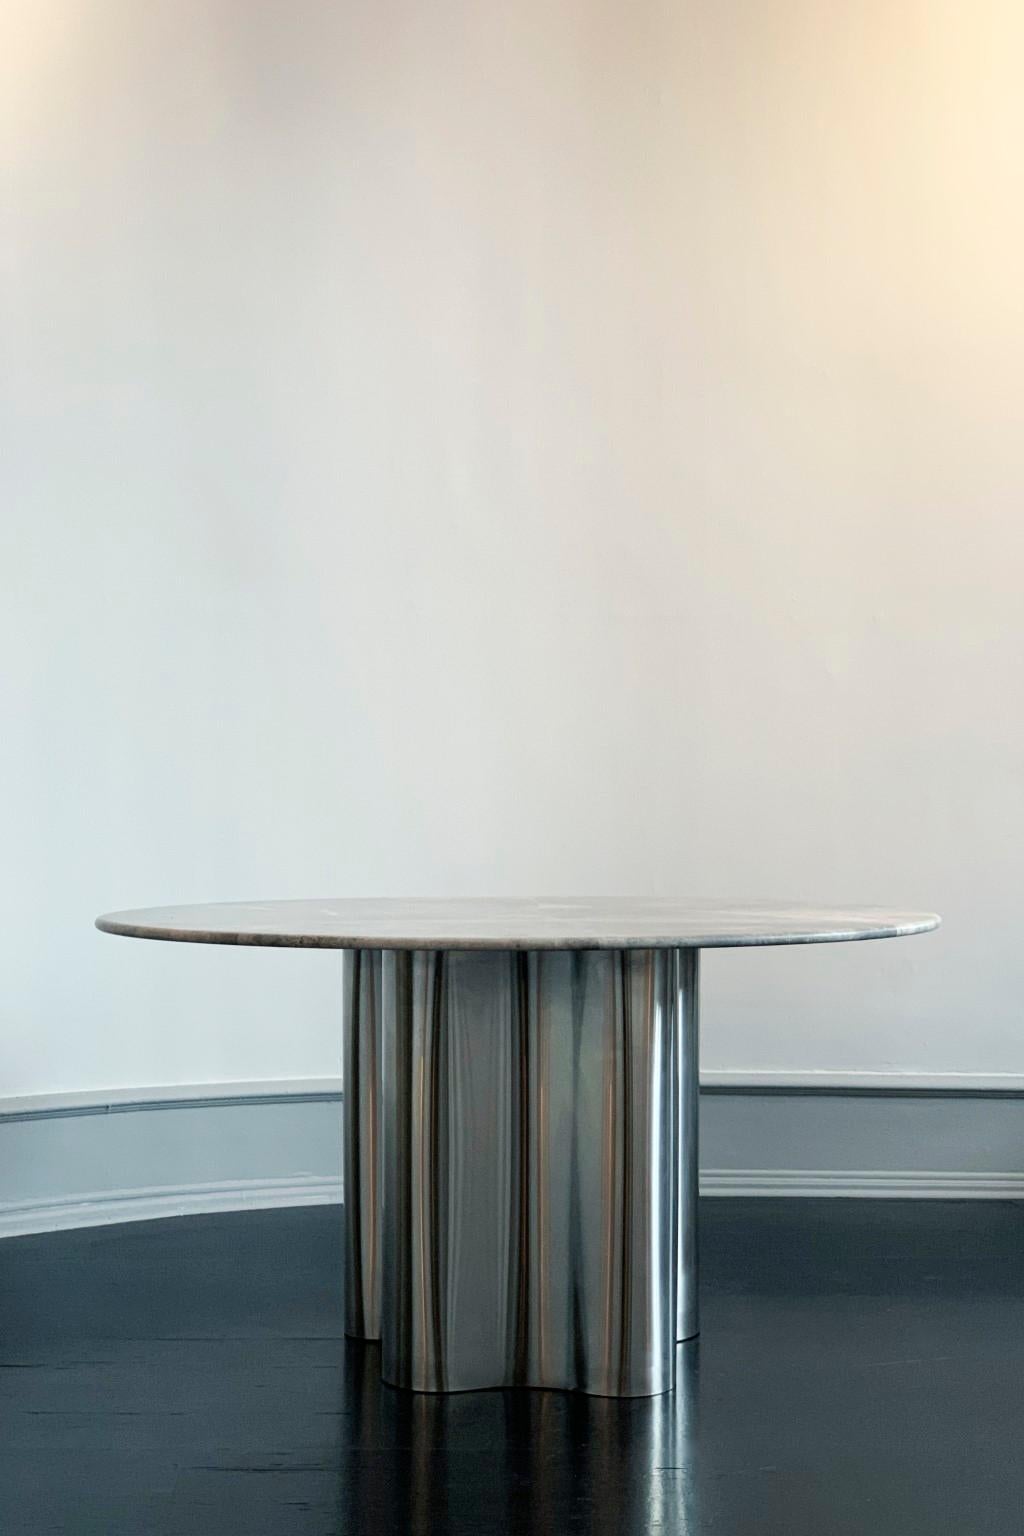 Marble dining table by Caia Leifsdotter
Materials: Marble Fioro di Bosco
Dimensions: Ø 140 cm 
Height with marble: 72cm
Also available in Ø 160 cm

The design studio of Caia Leifsdotter designs bespoke objects for clients & projects. A bespoke